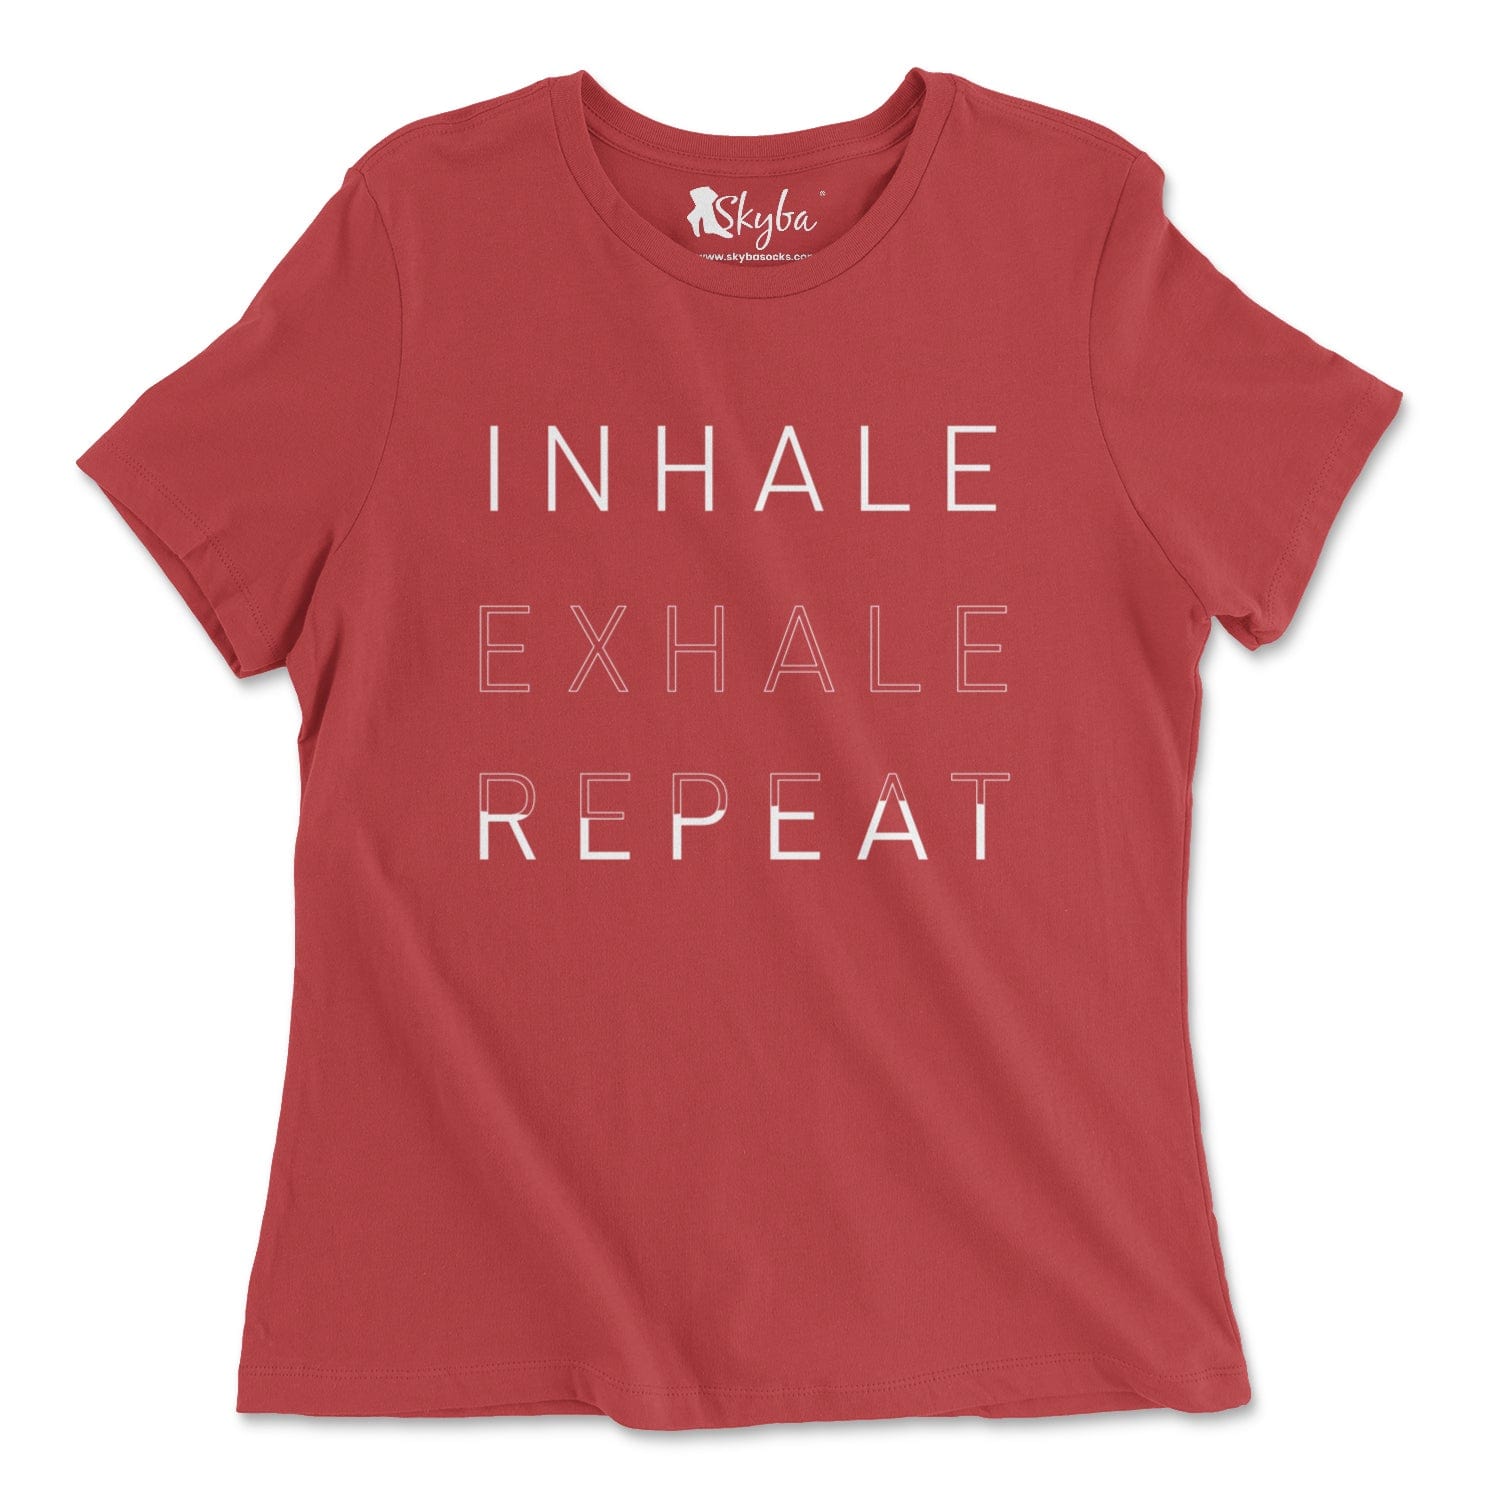 "Inhale Exhale Repeat" Pilates Principles - Classic Tee Skyba T-Shirt